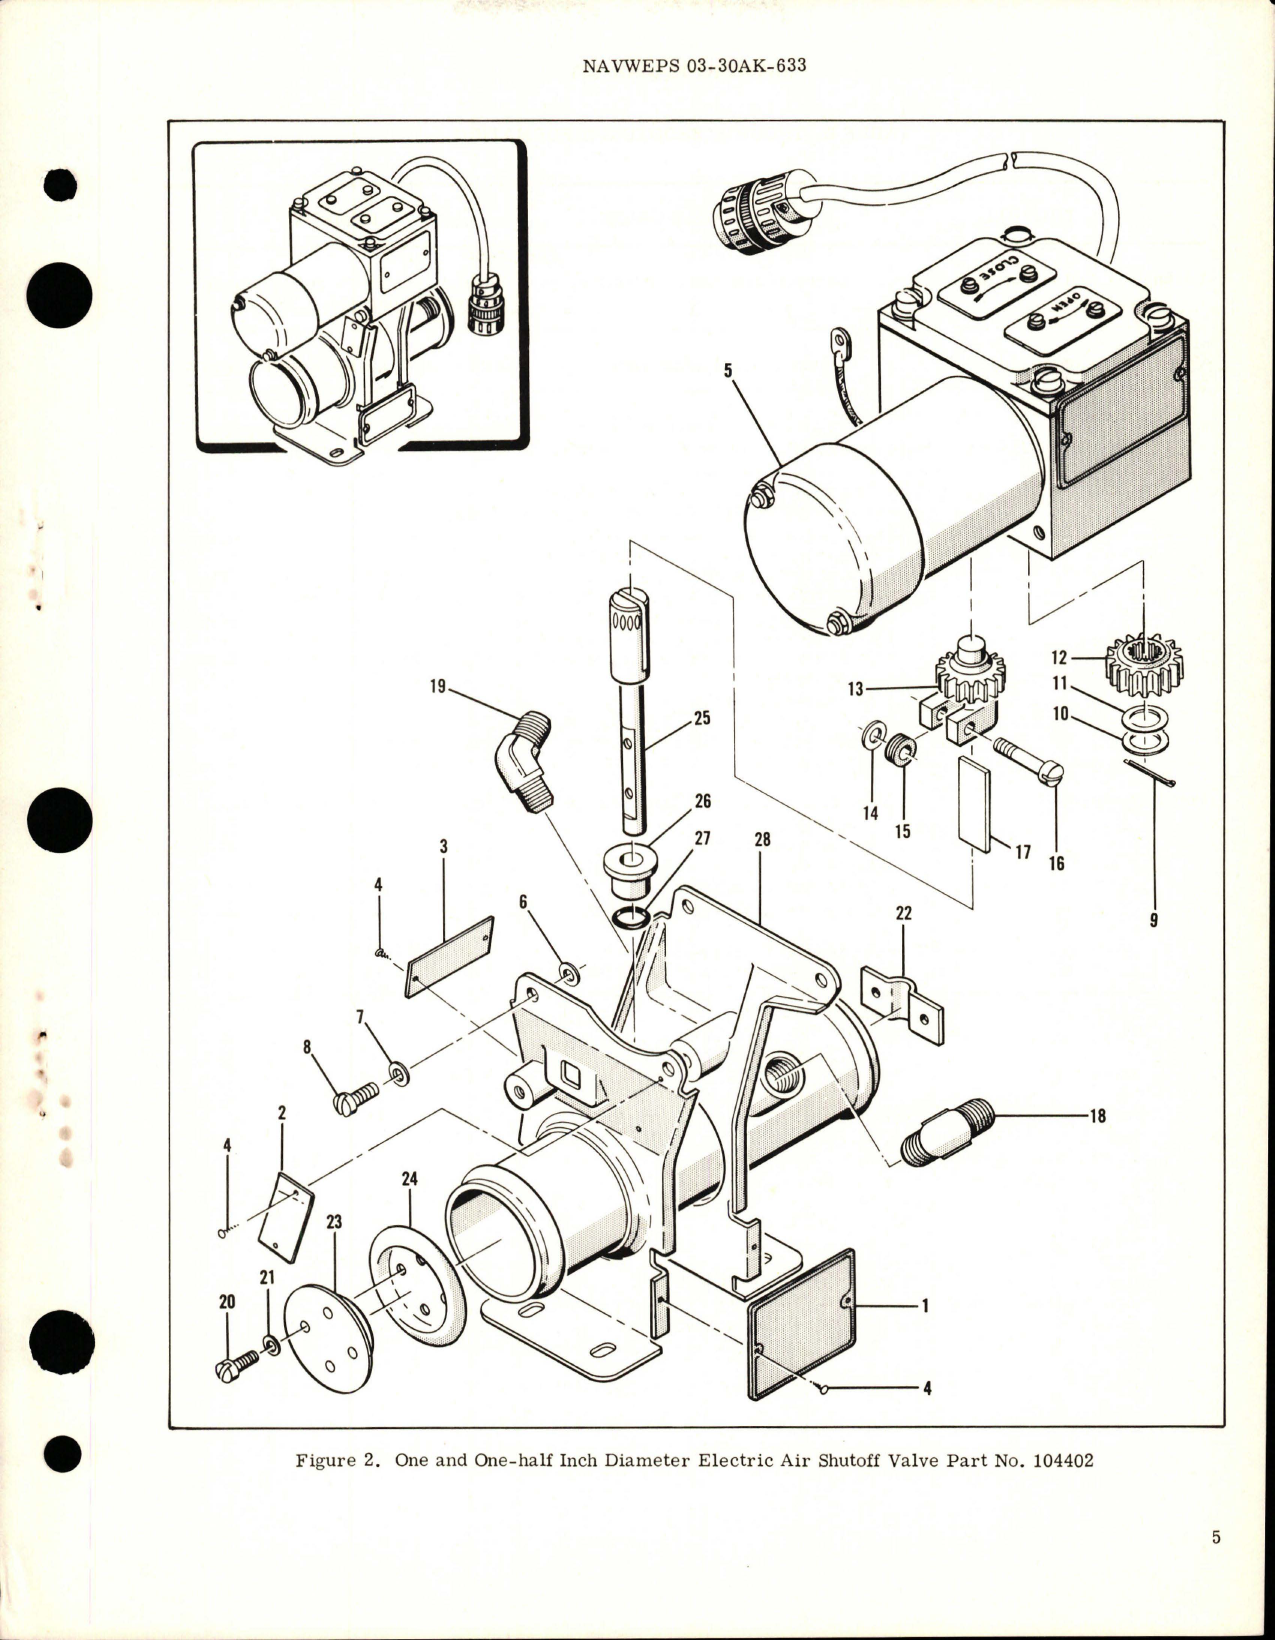 Sample page 5 from AirCorps Library document: Overhaul Instructions with Parts Breakdown for Electric Air Shutoff Valve 1 1/2